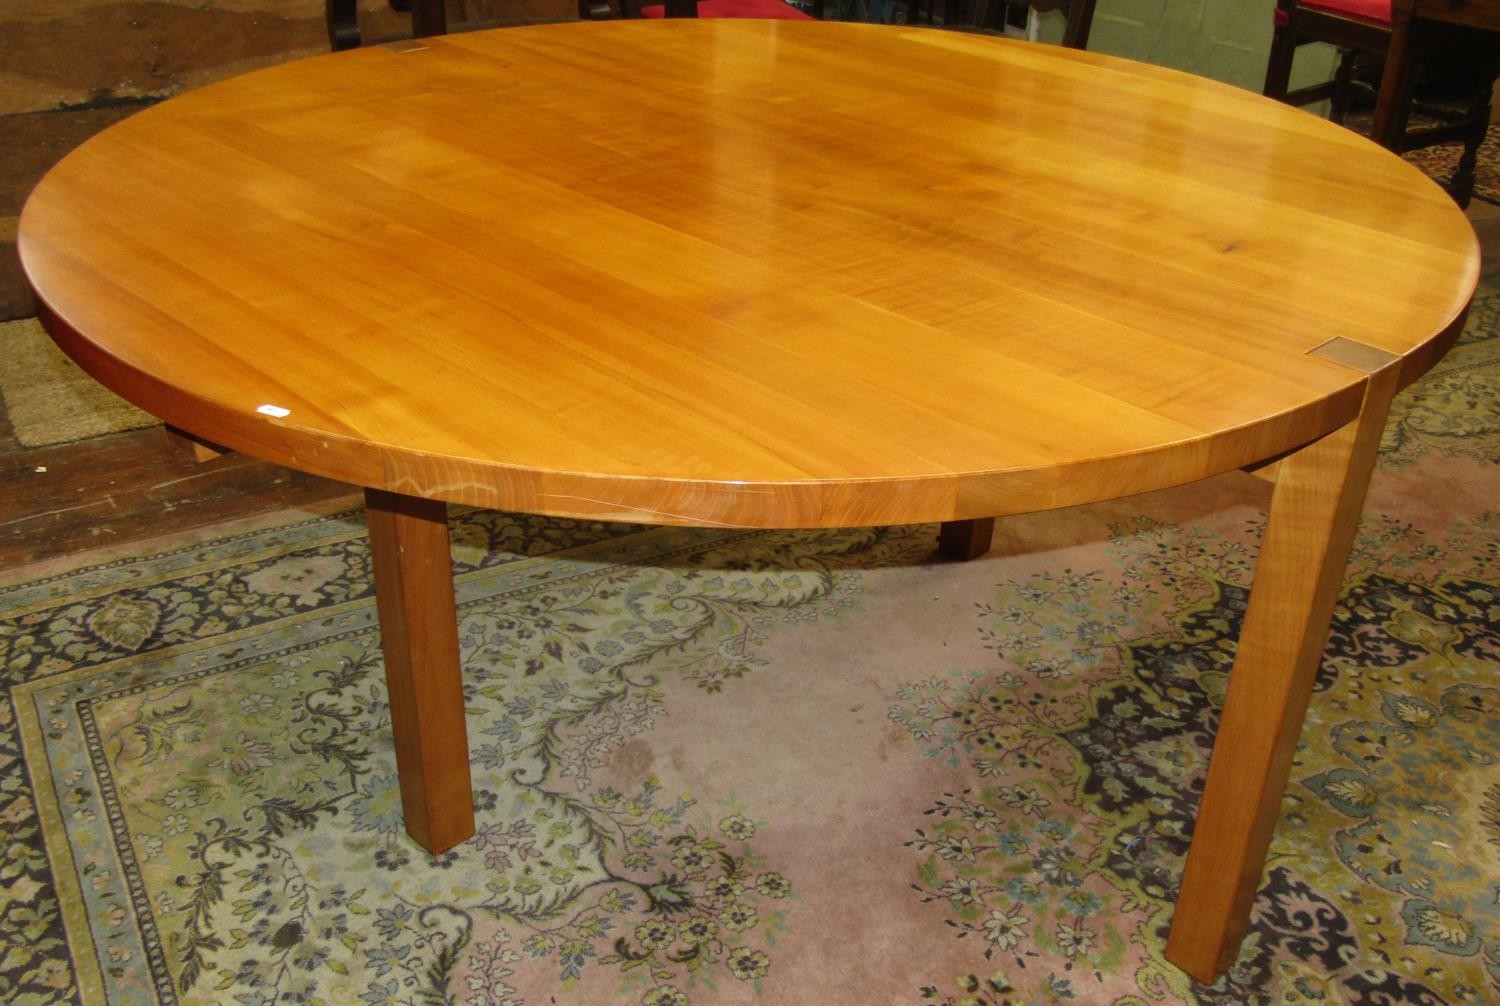 A bespoke made John Makepeace table and chairs made in English wild cherry wood, the circular